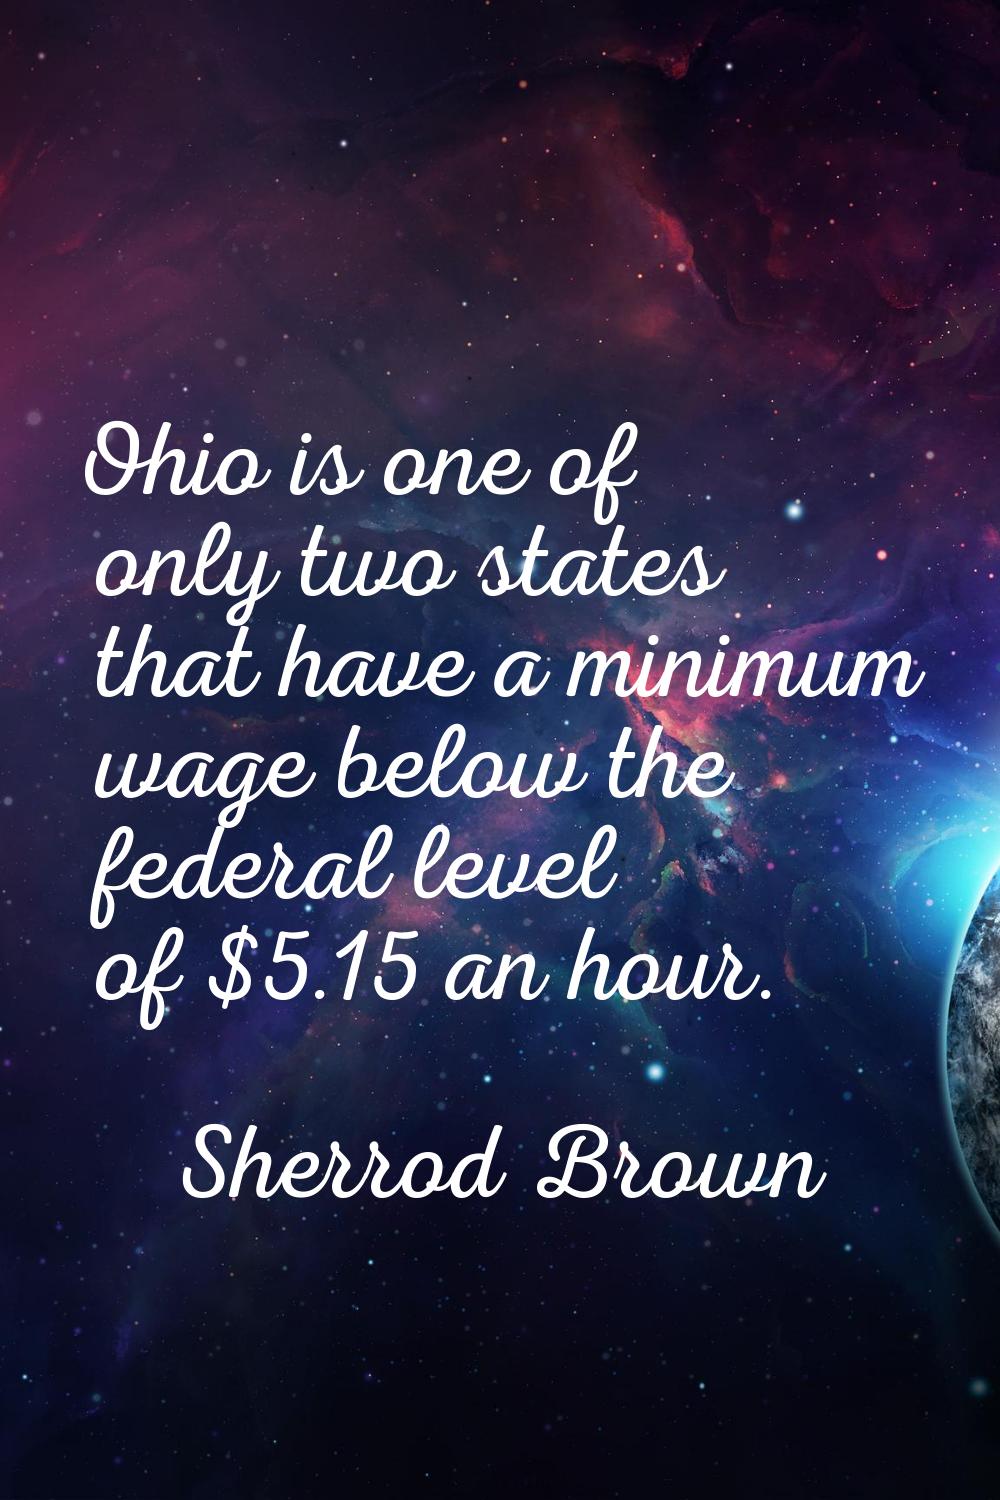 Ohio is one of only two states that have a minimum wage below the federal level of $5.15 an hour.